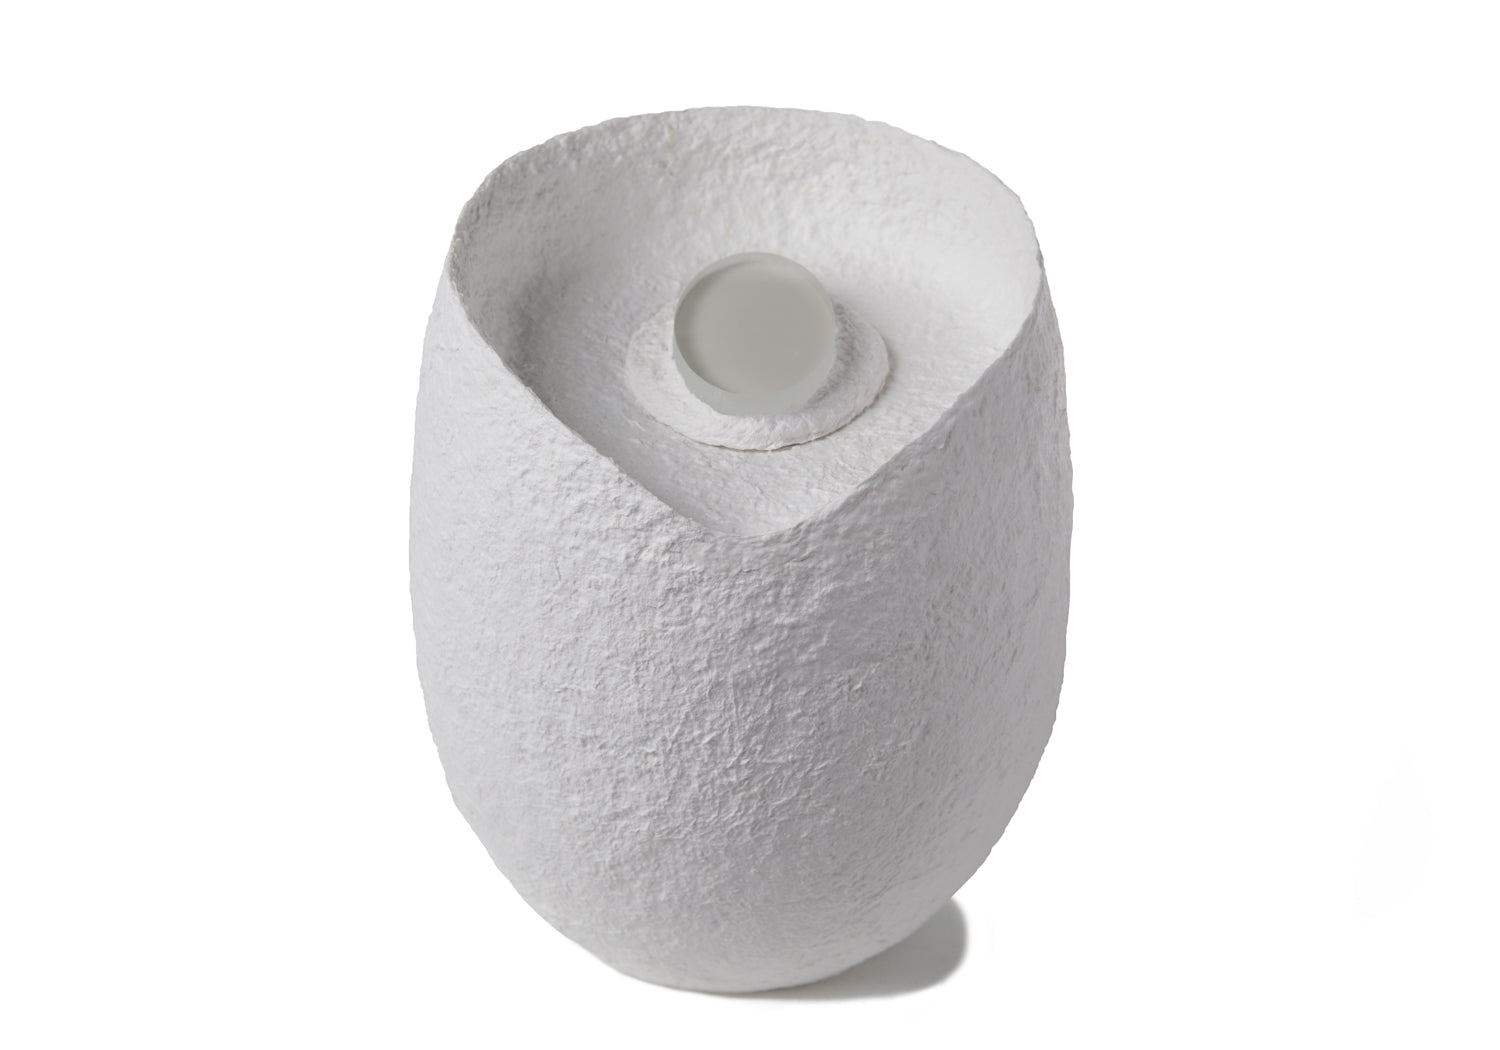 Picture of an ovoid biodegradable cremation urn made of white cotton fibre on sale at Muses Design Urns. Front view.